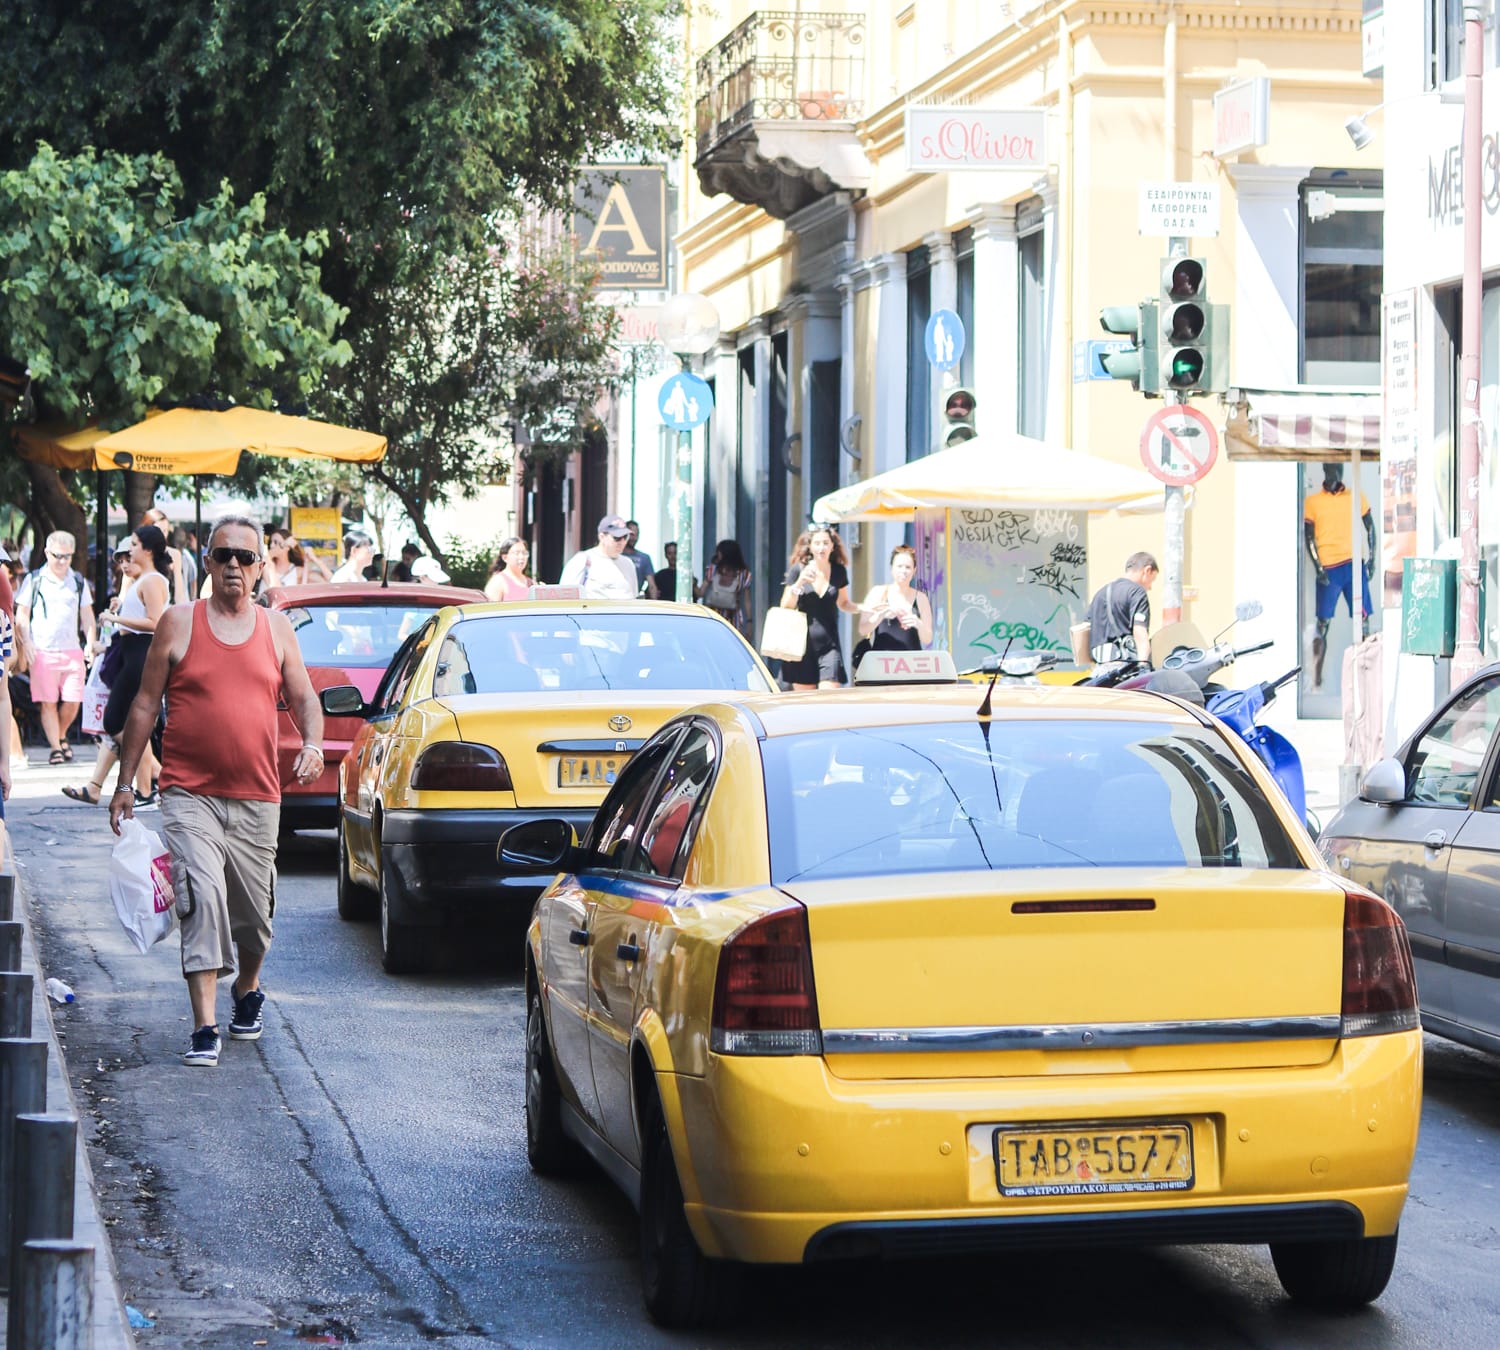 Taxi in Athen - Griechenland